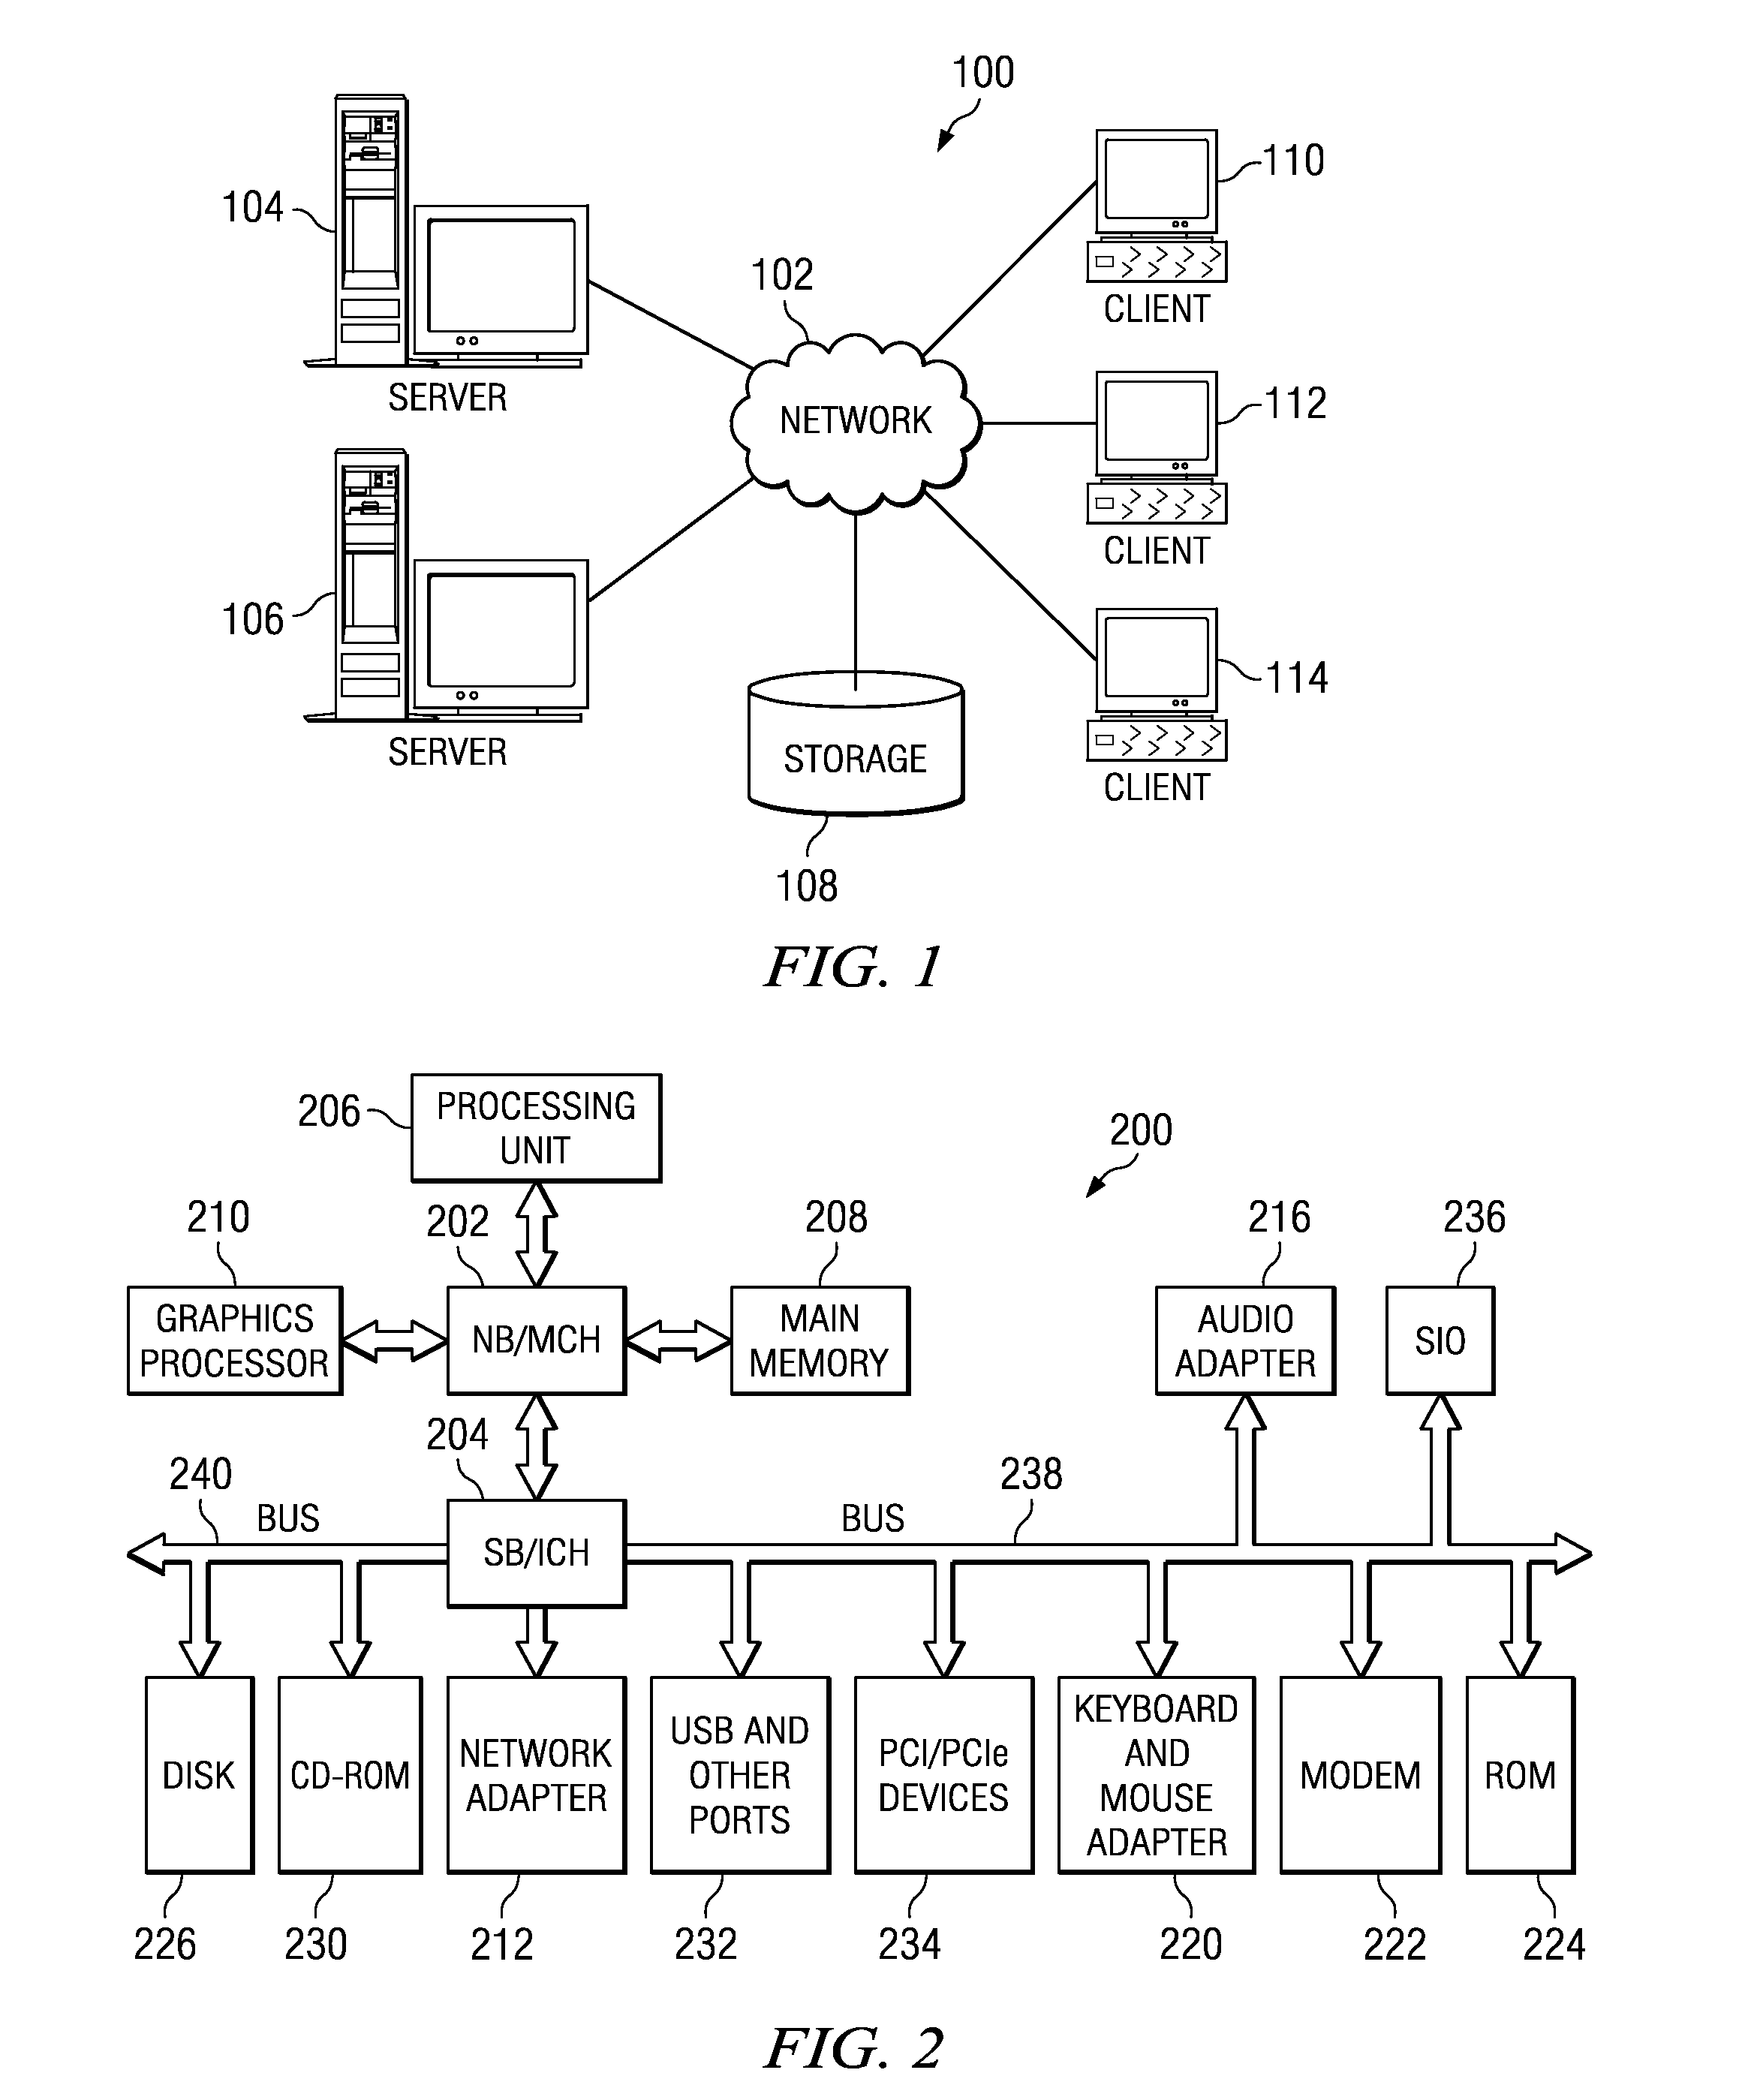 System and Method for Data Processing Using a Low-Cost Two-Tier Full-Graph Interconnect Architecture